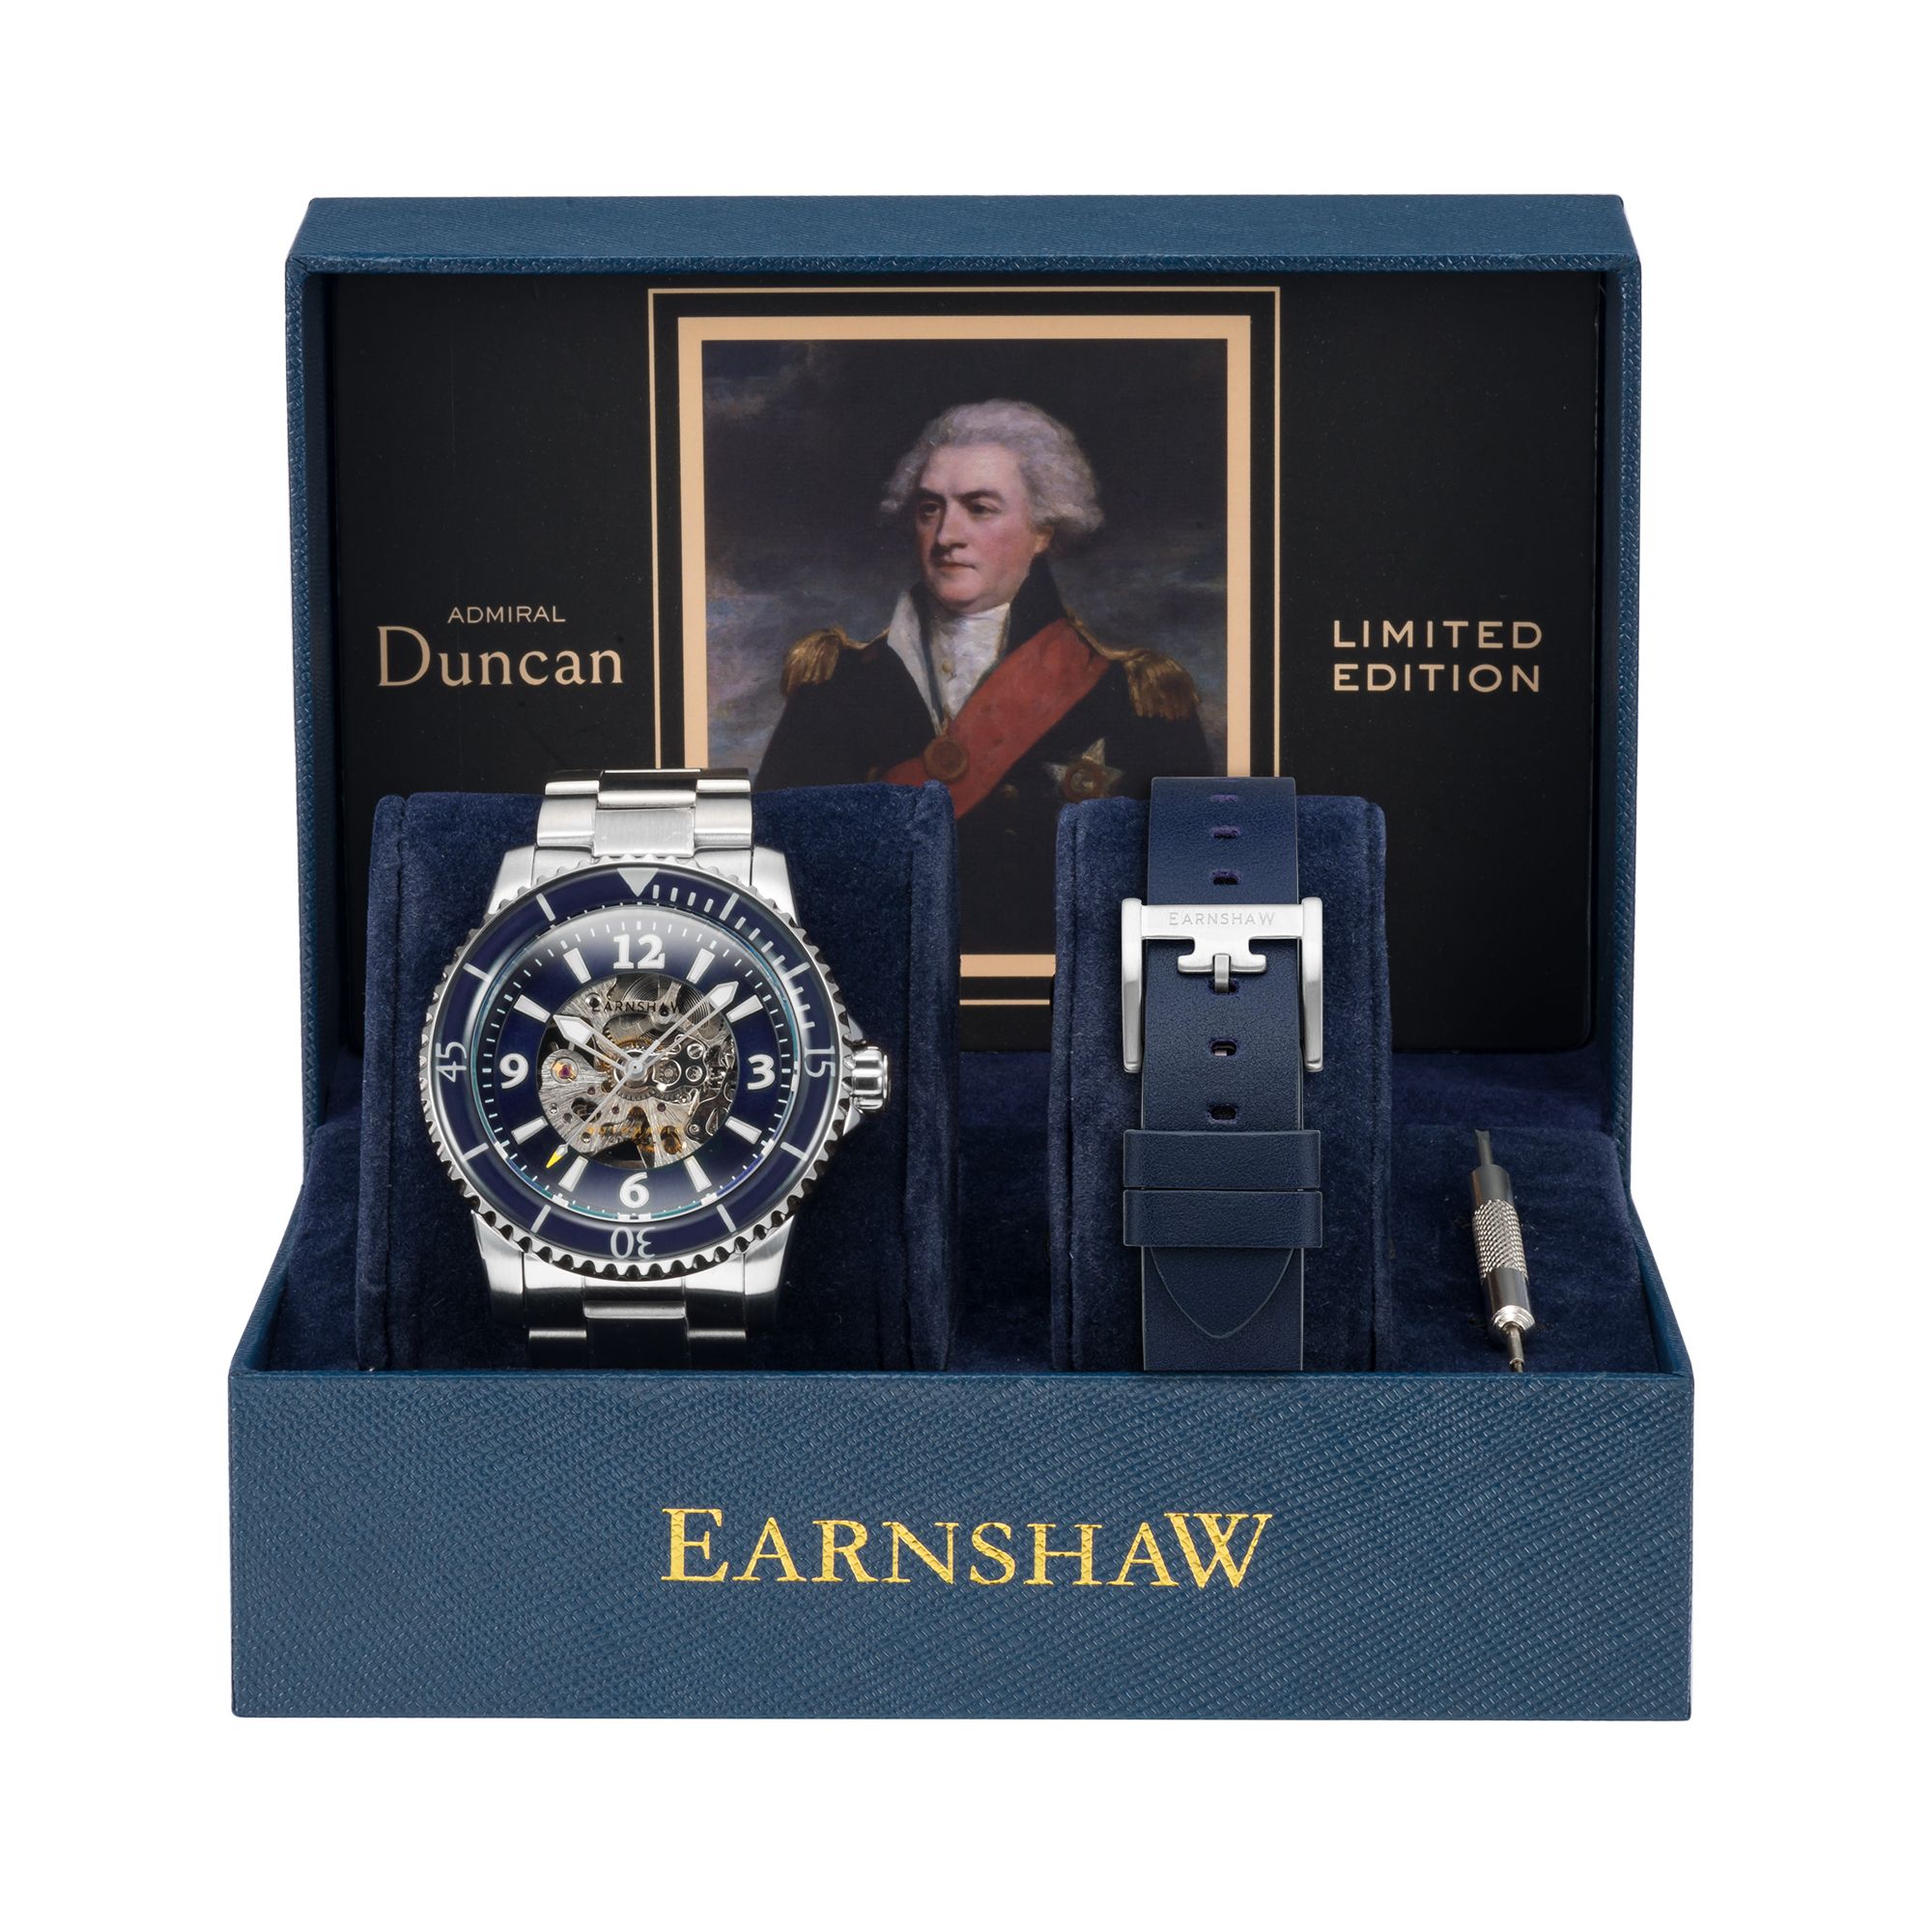 Thomas Earnshaw 43mm Men's Automatic Watch ADMIRAL LIMITED EDITION ES-8129-22